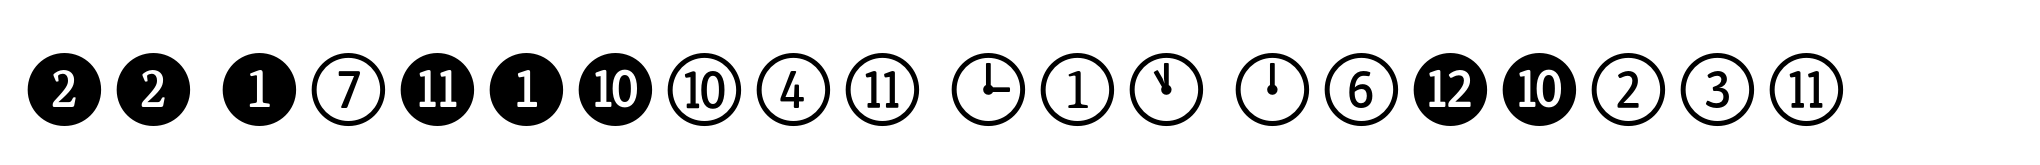 FF Dingbats 2.0 Numbers image